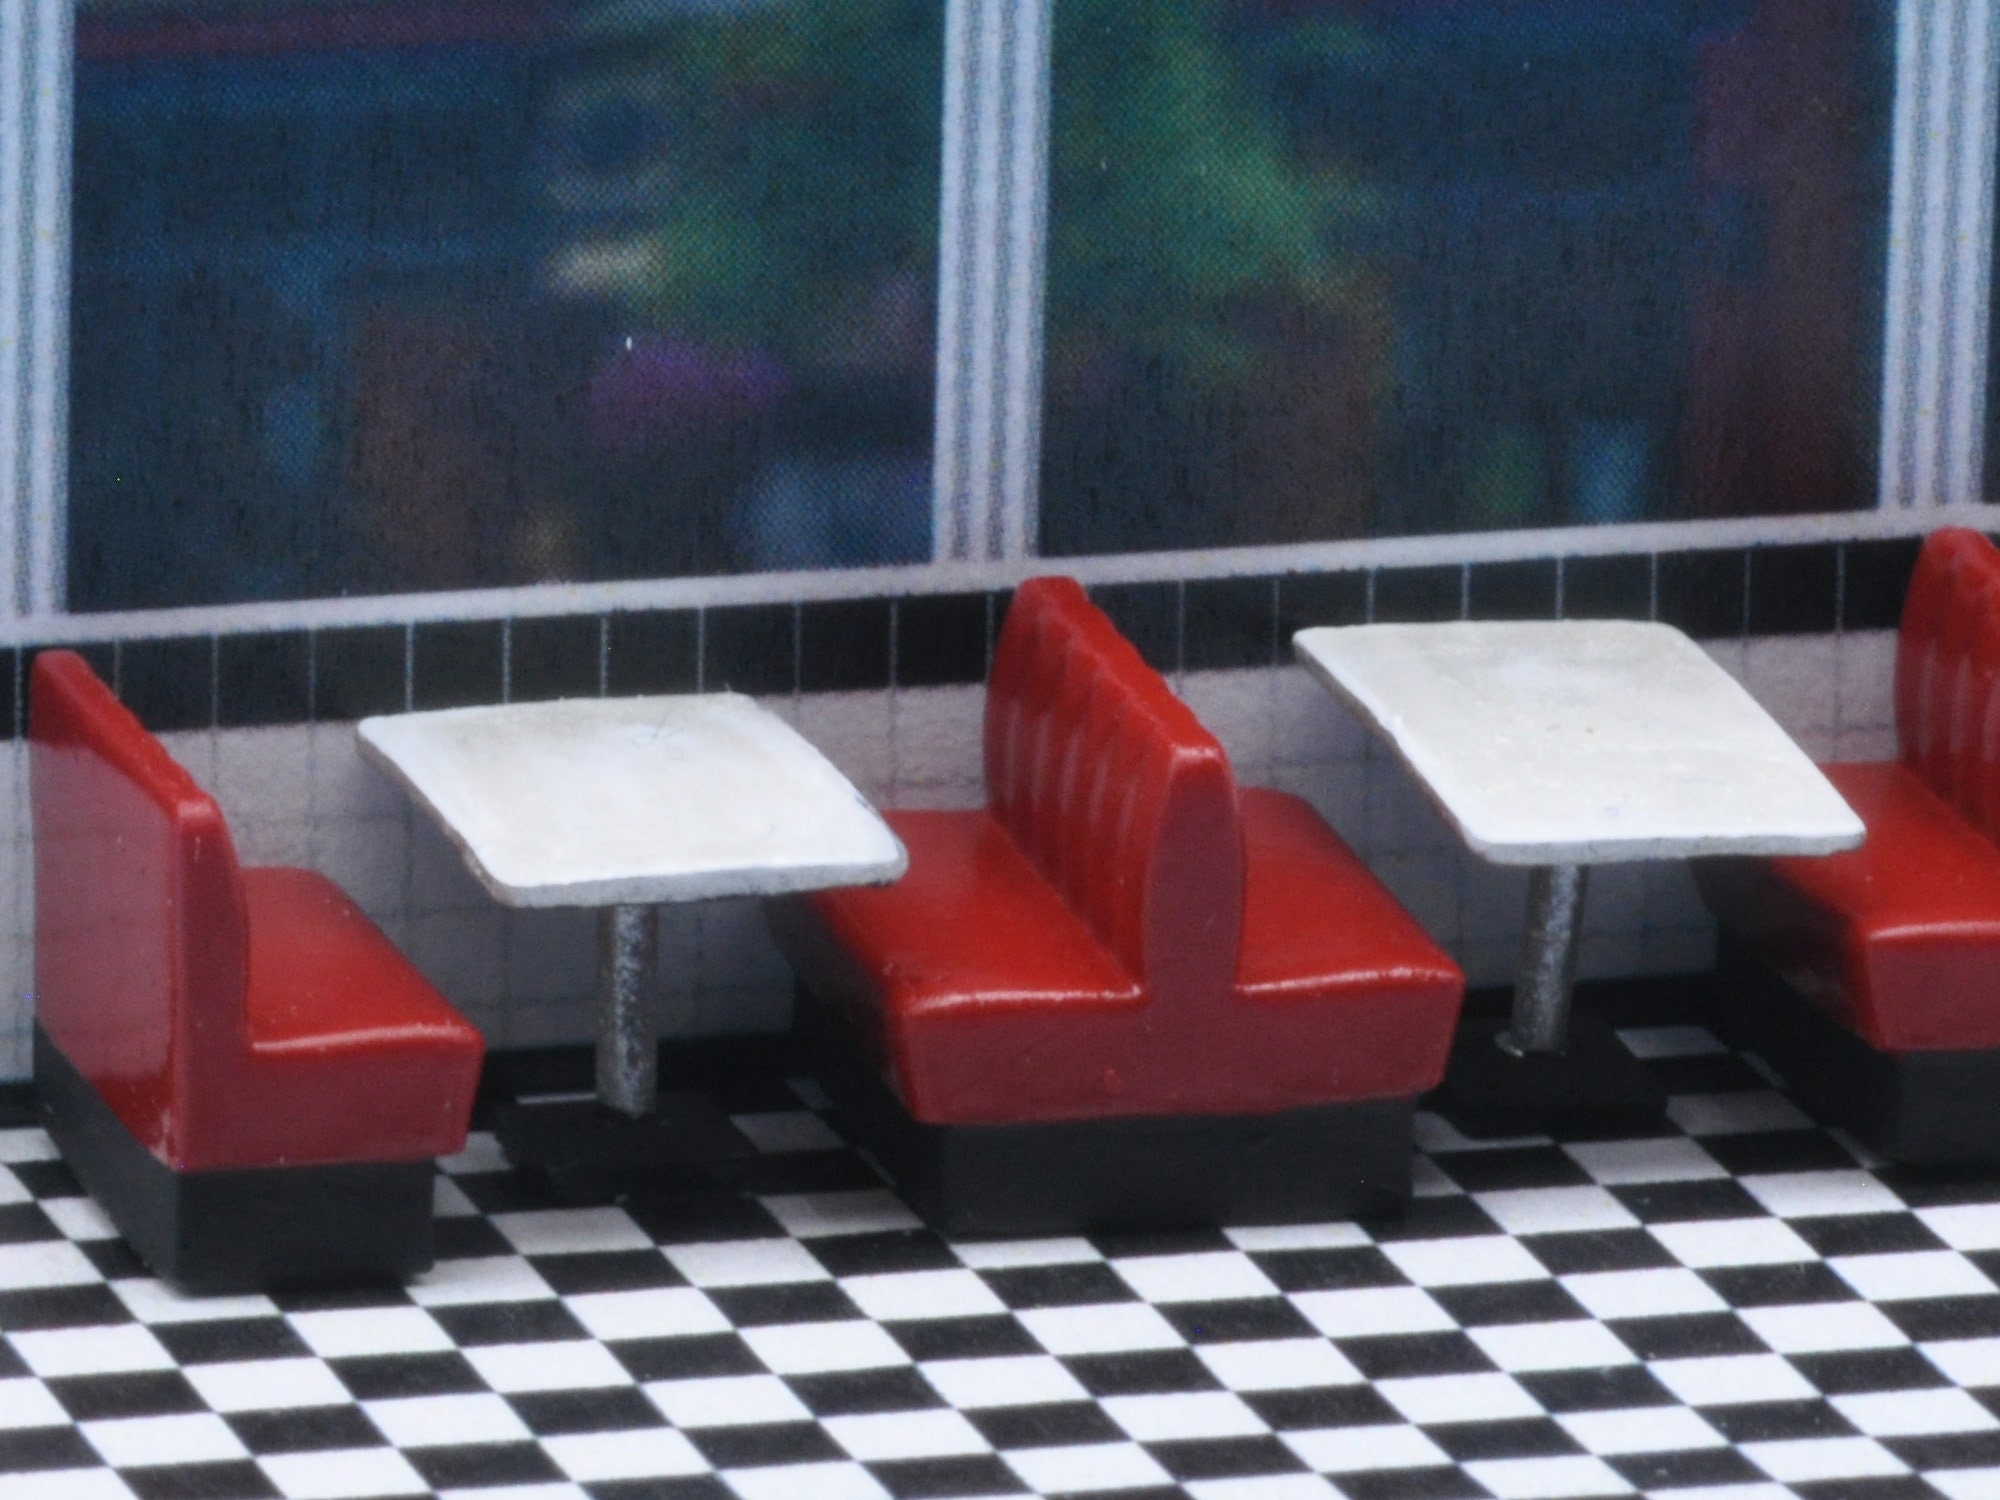 America Style 1950s Vinyl Leather Restaurant Booth Seating, Restaurant Booth  Set for Sale, Retro American Diner - China Cafe Booth, Booth Seating